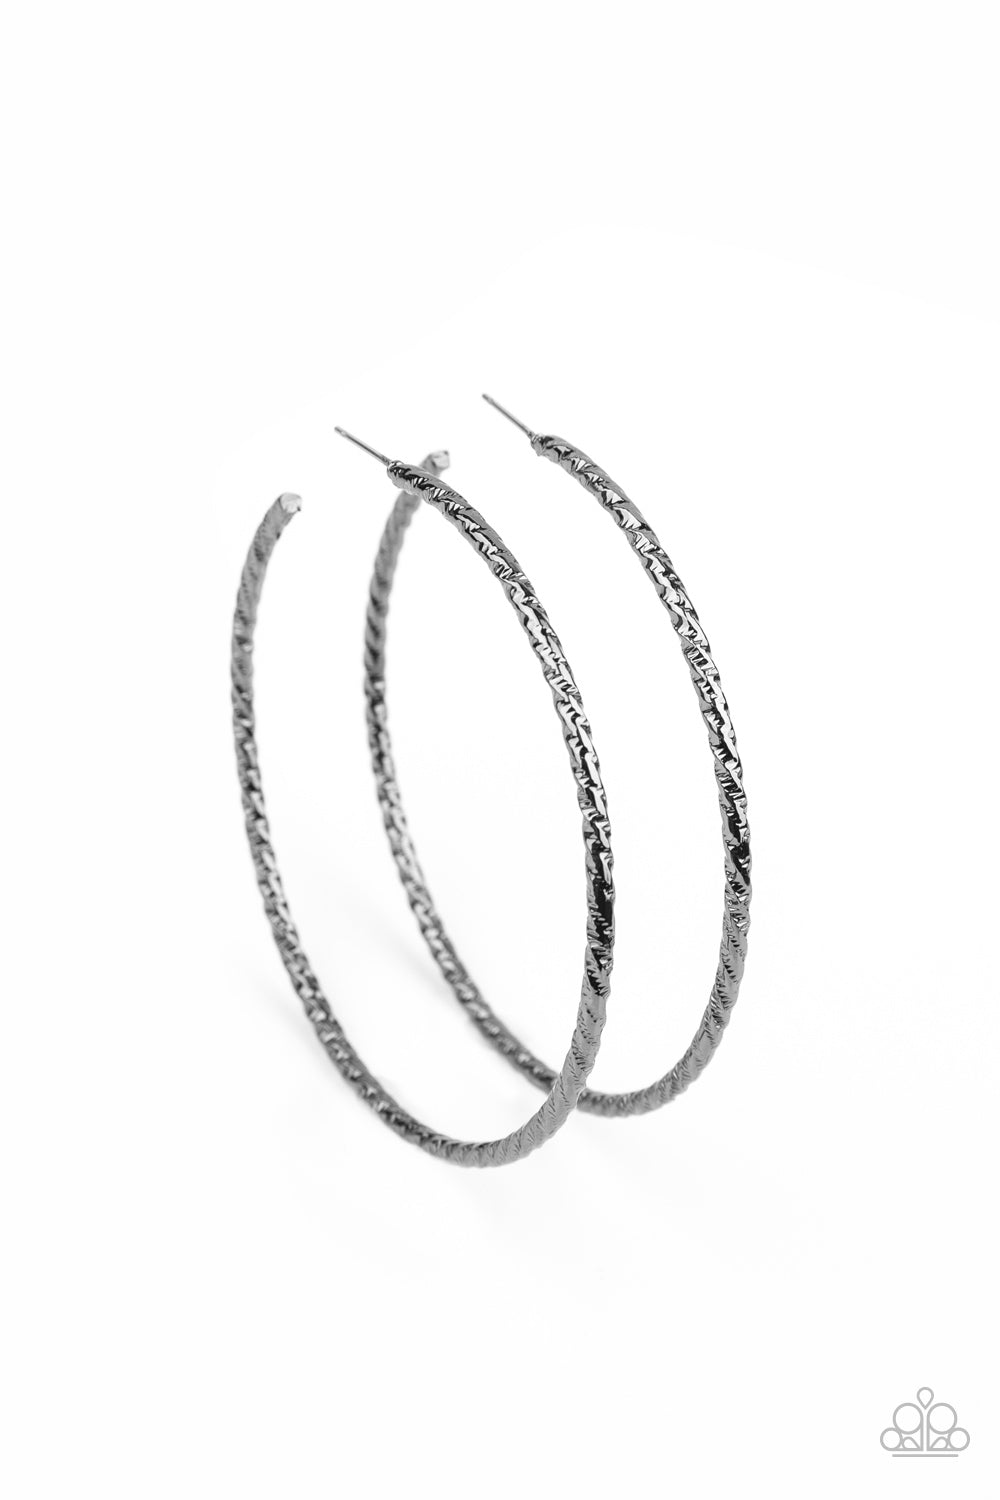 Etched and hammered in striking texture, a shimmery gunmetal bar delicately curls into a dramatically oversized hoop. Earring attaches to a standard post fitting. Hoop measures approximately 3